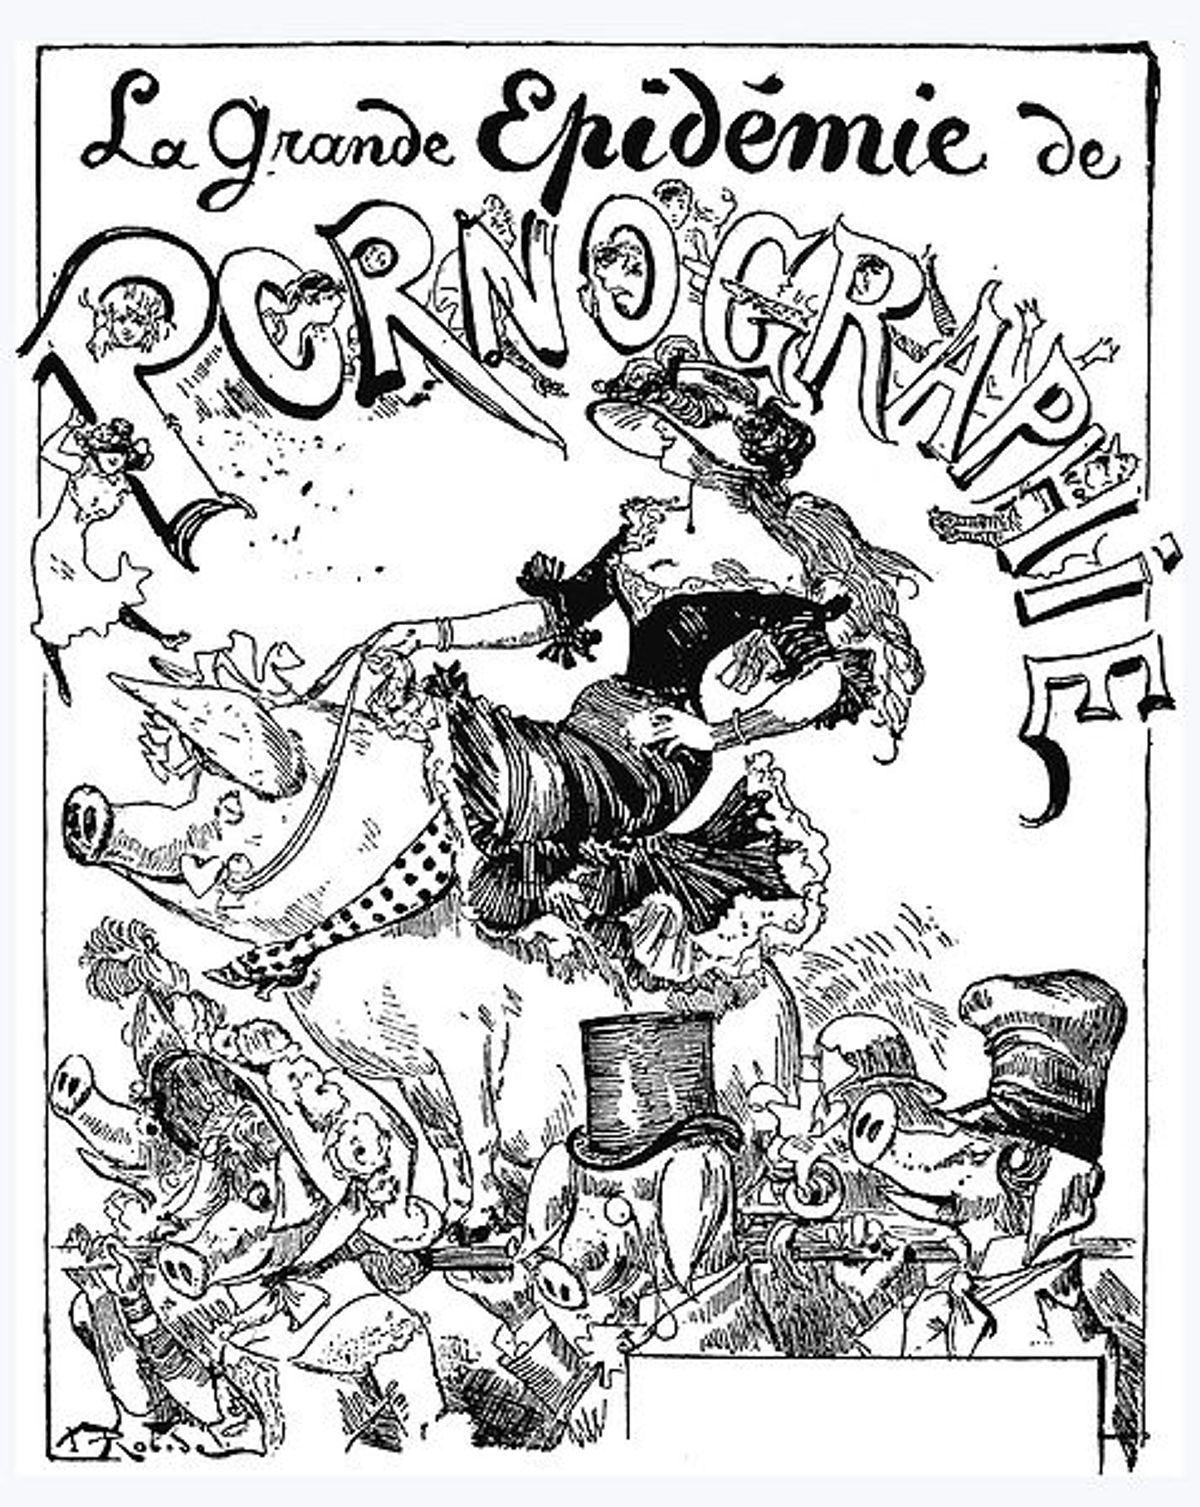 Caricature on "The great epidemic of pornography". From 19th-century French illustration Le Courrier Francais.